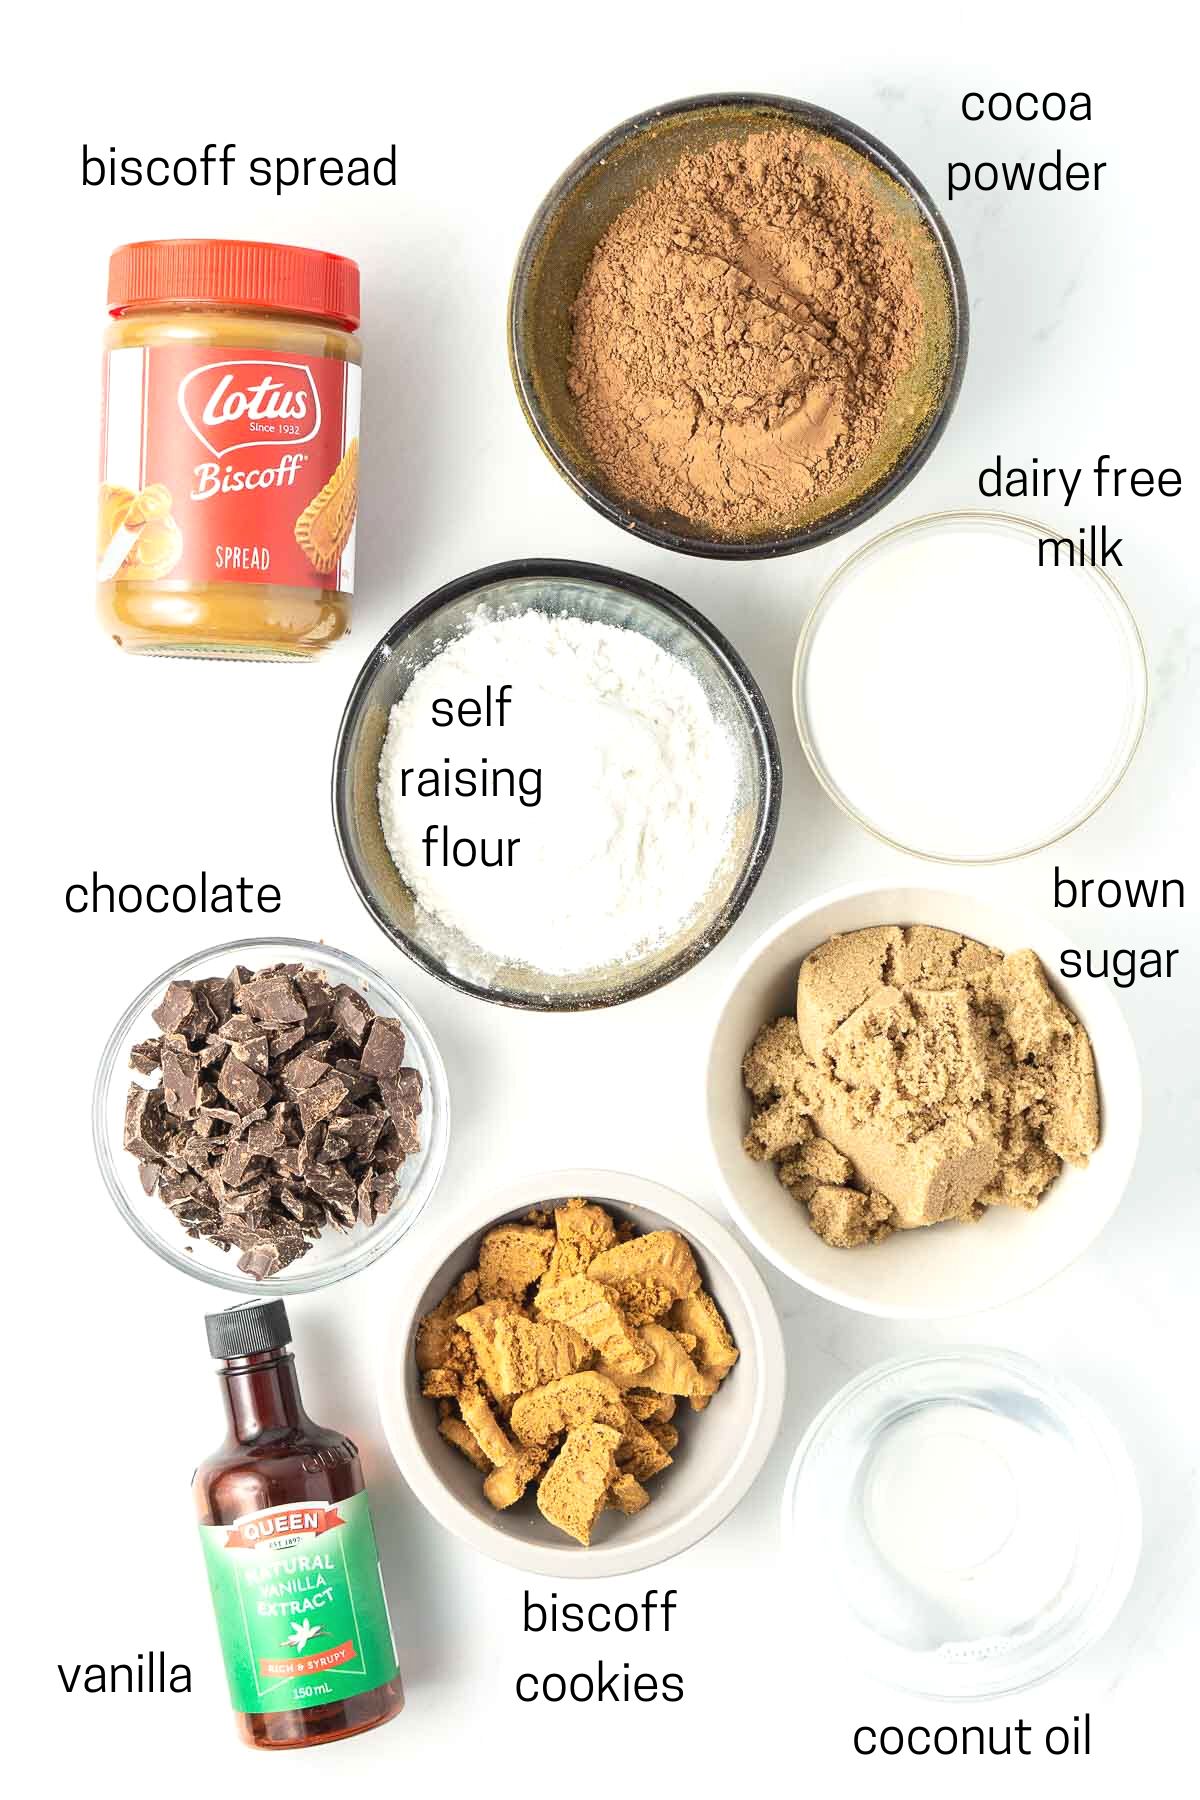 All ingredients needed for vegan biscoff brownies laid out in small bowls.